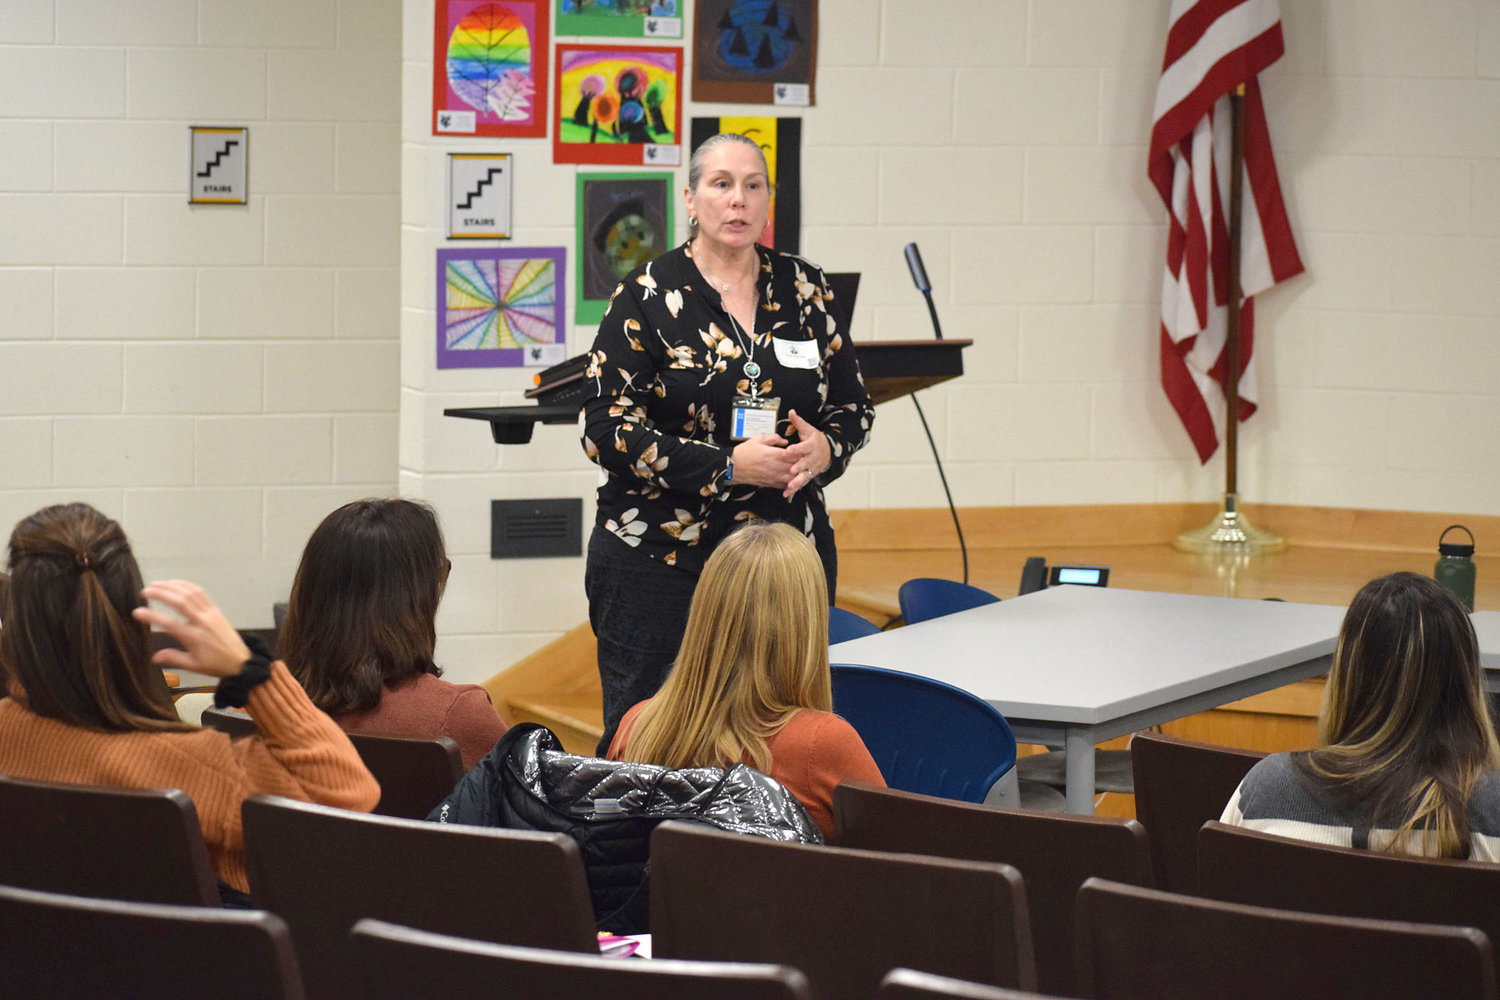 Kellie Maxwell speaks to attendees during a DASA coordinator refresher workshop Nov. 17 at Central Valley Academy in Ilion.